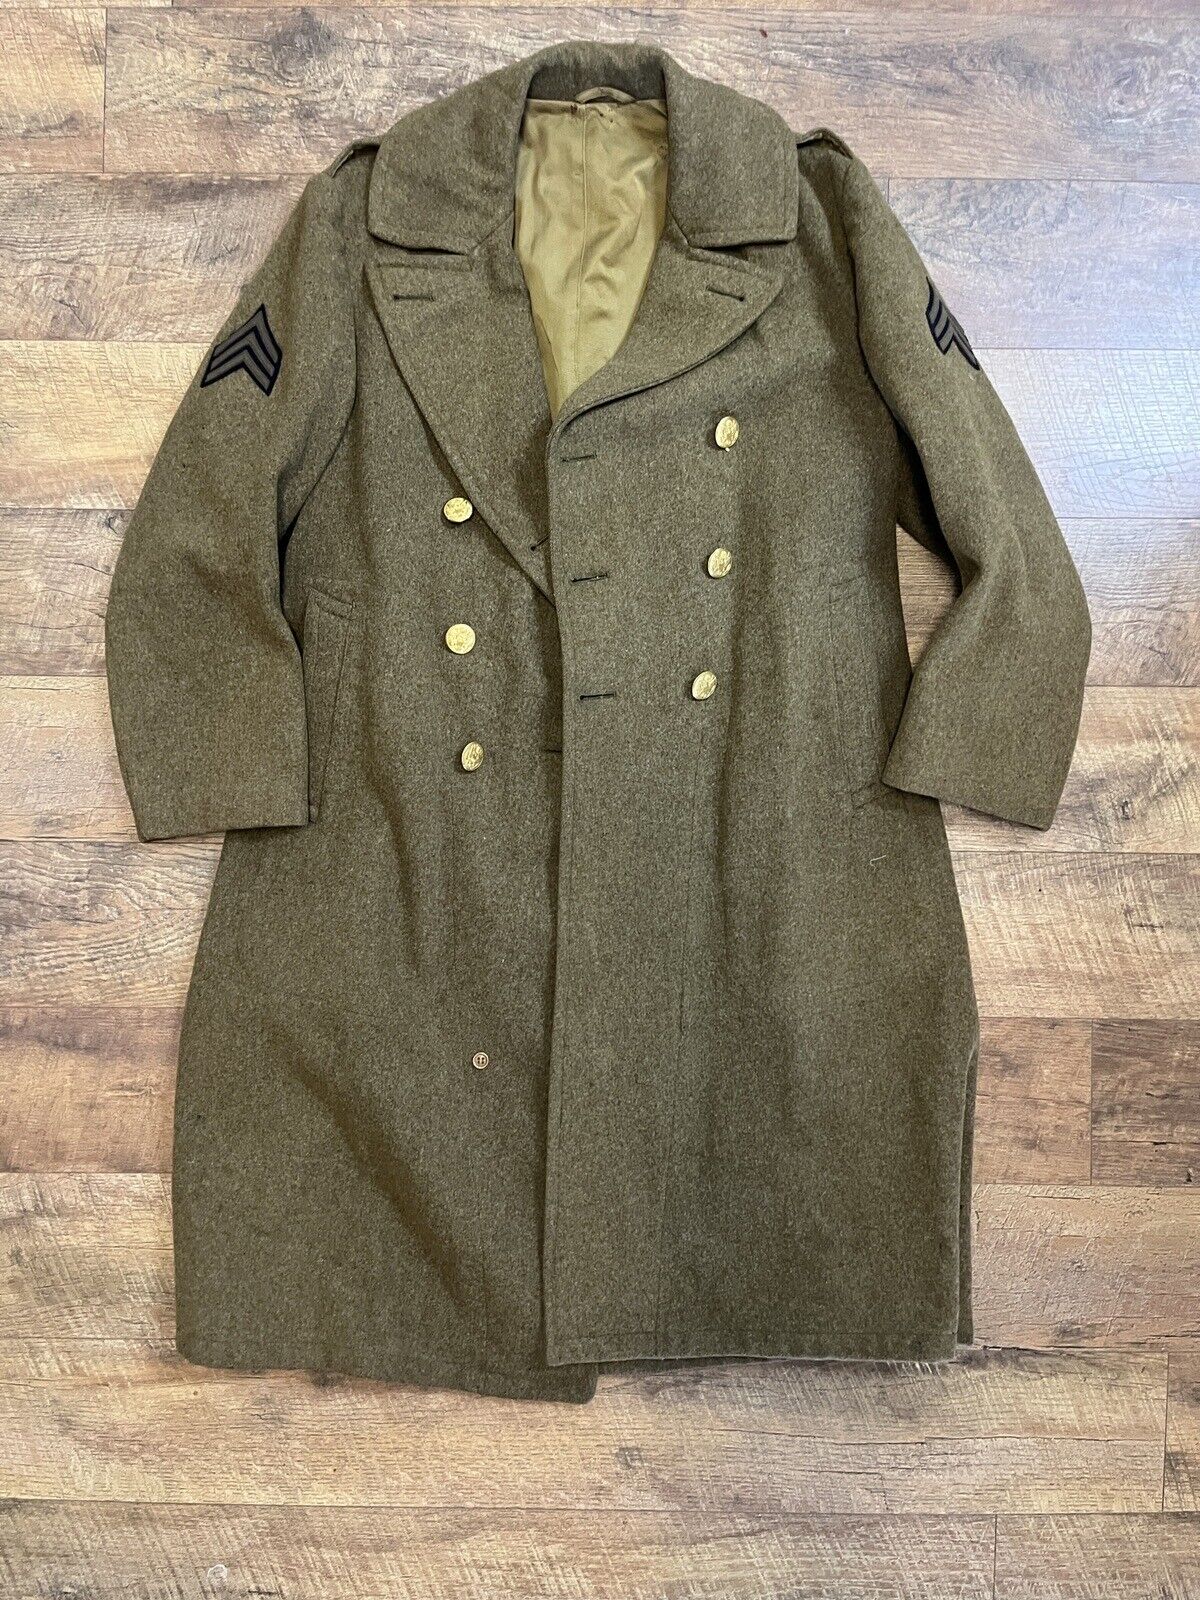 vintage WWII US Army Cold Weather Wool Trench Coat 1940’s